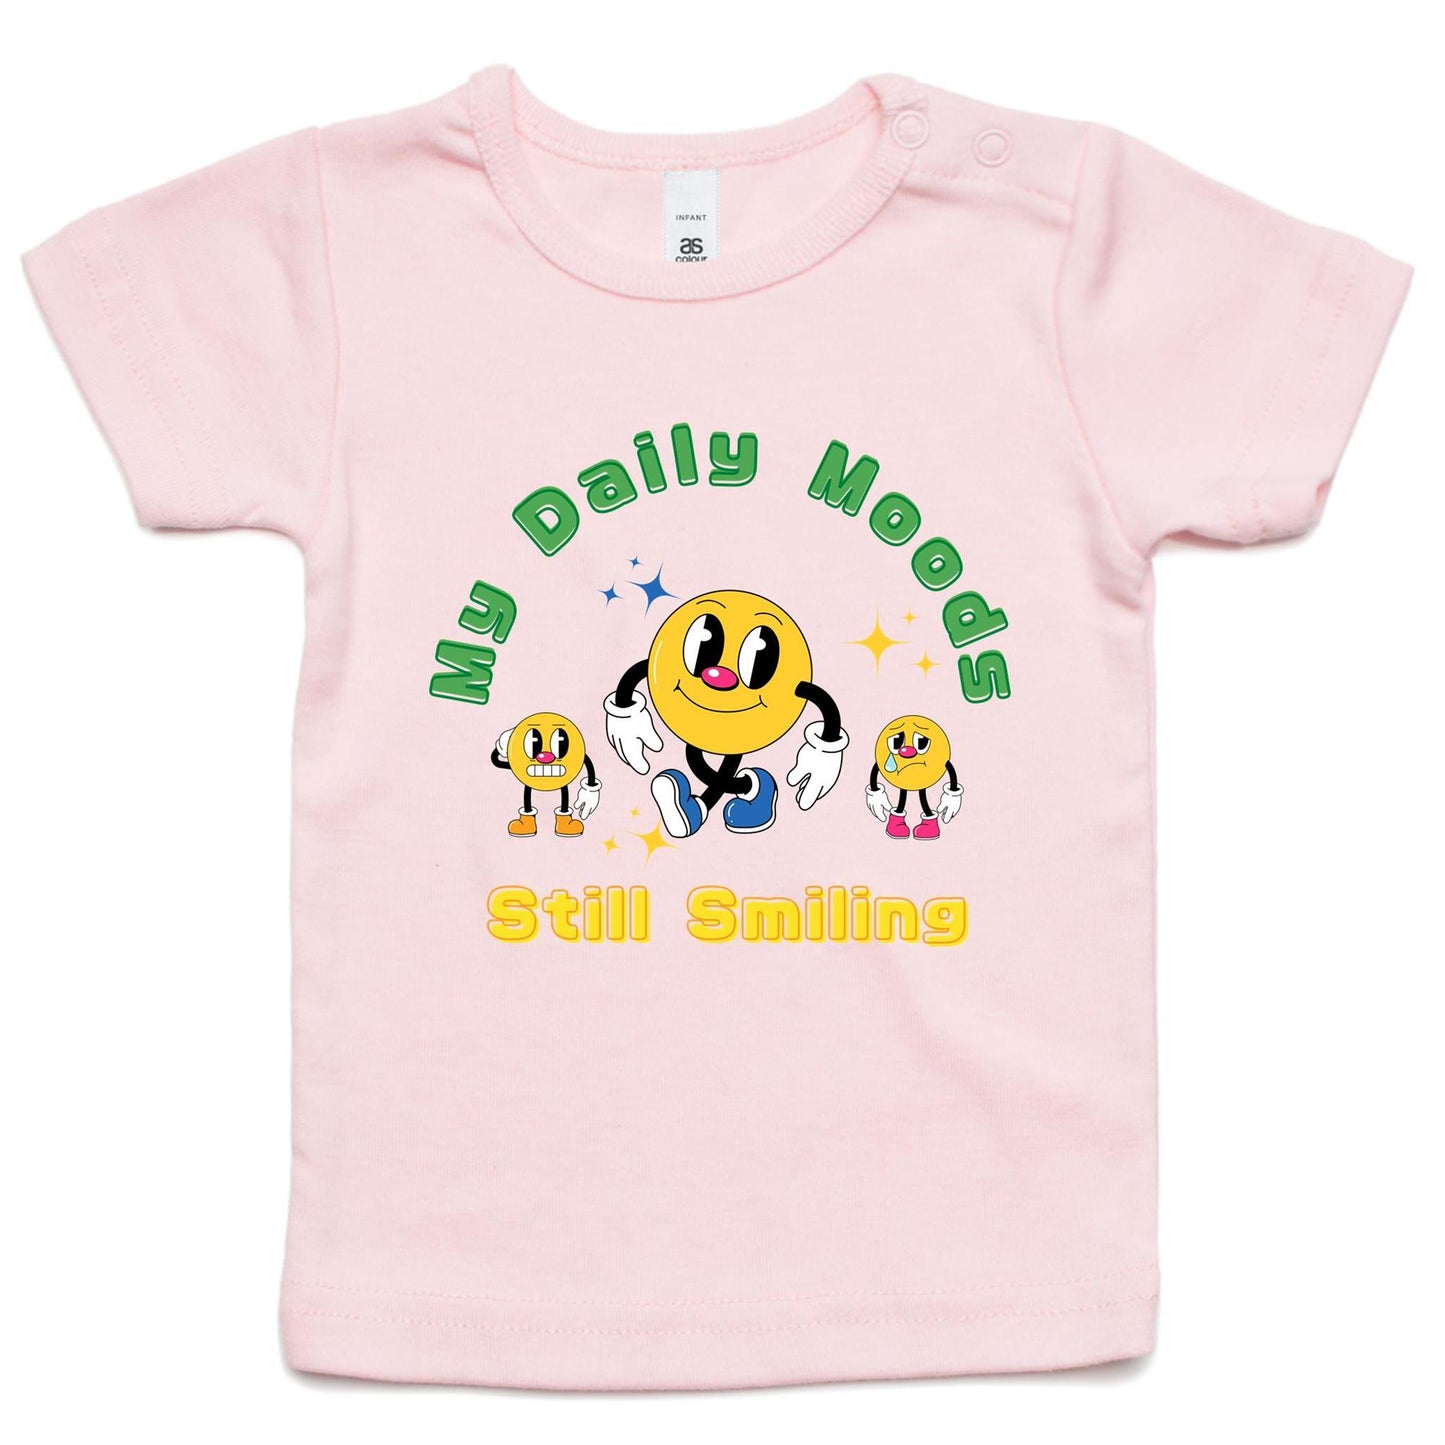 My Daily Moods - Baby T-shirt Pink Baby T-shirt